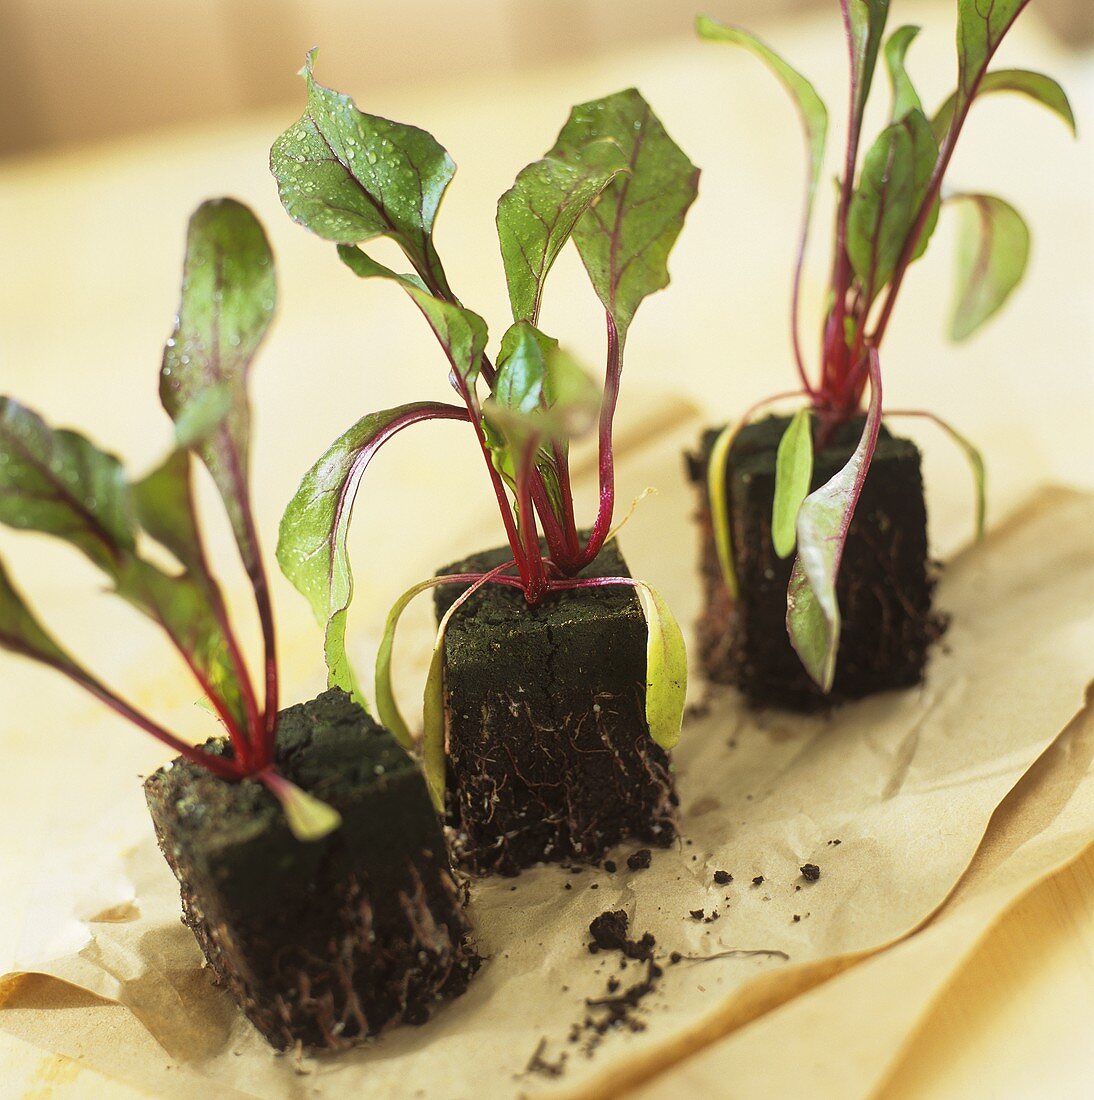 Small beetroot plants